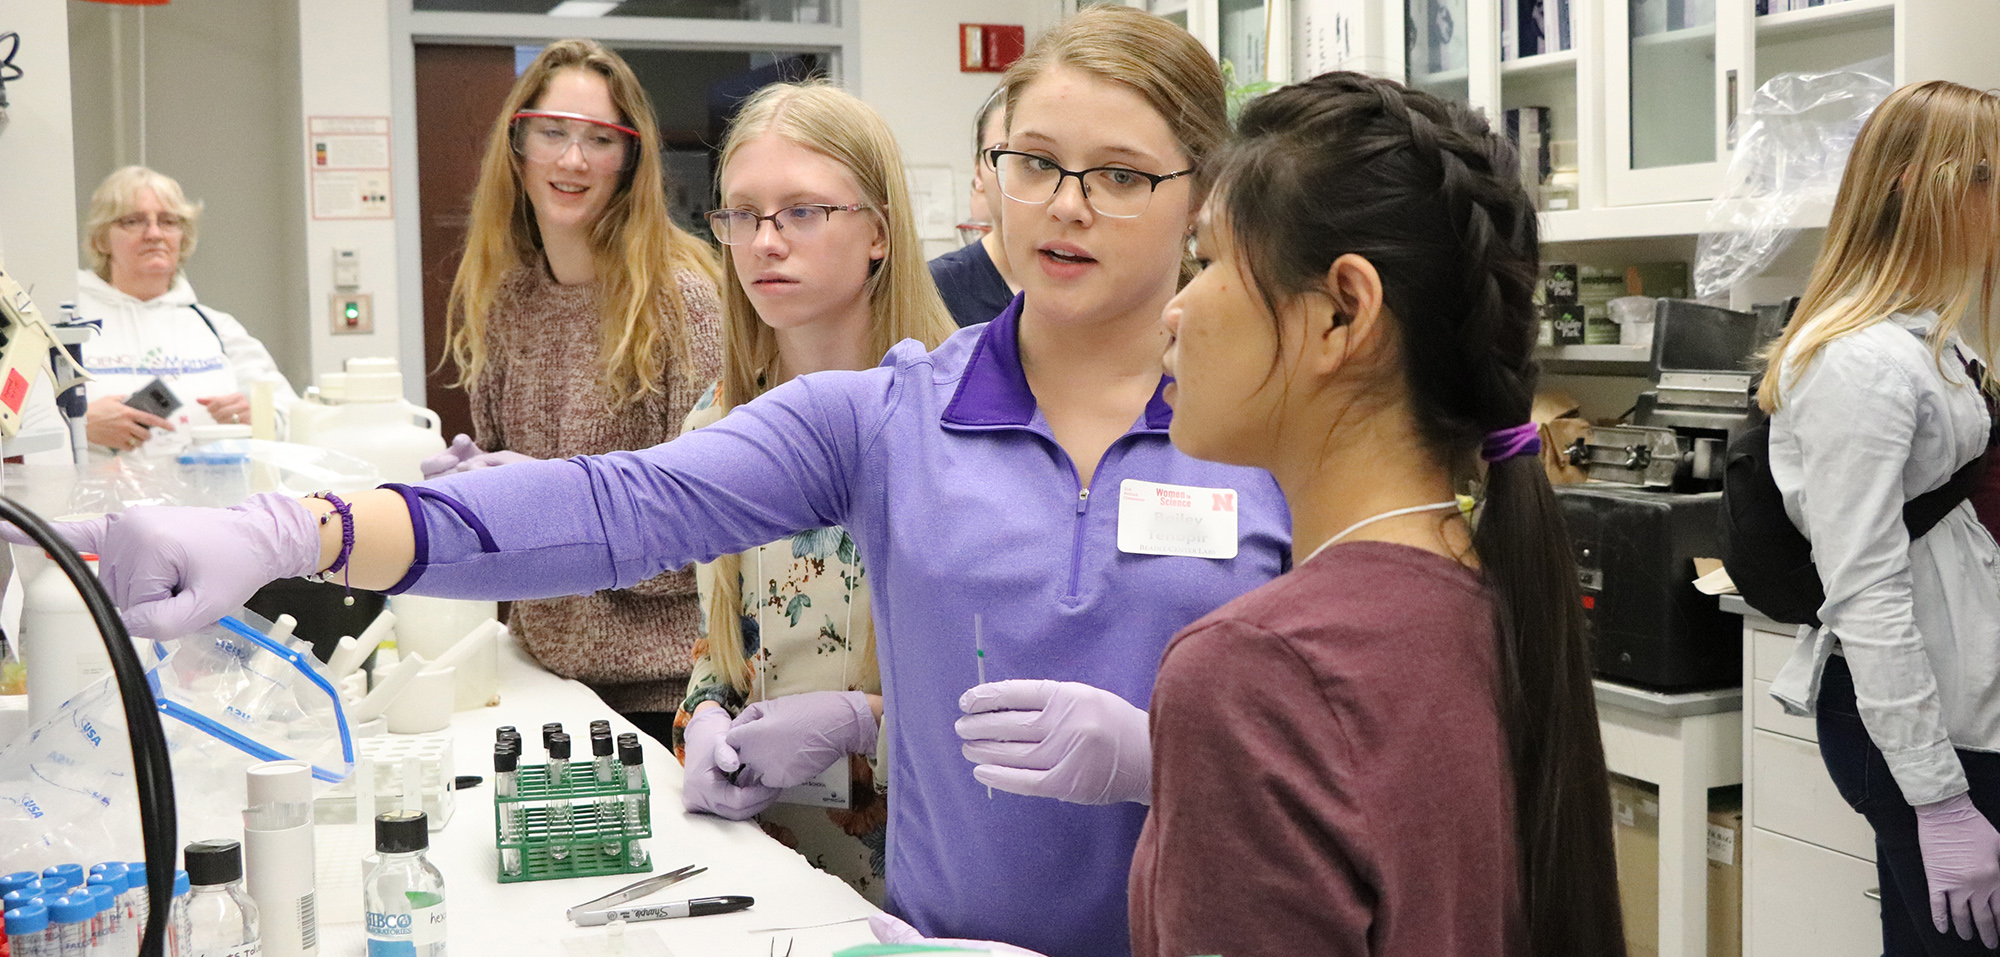 2019 Women in Science Conference at Beadle Center Labs